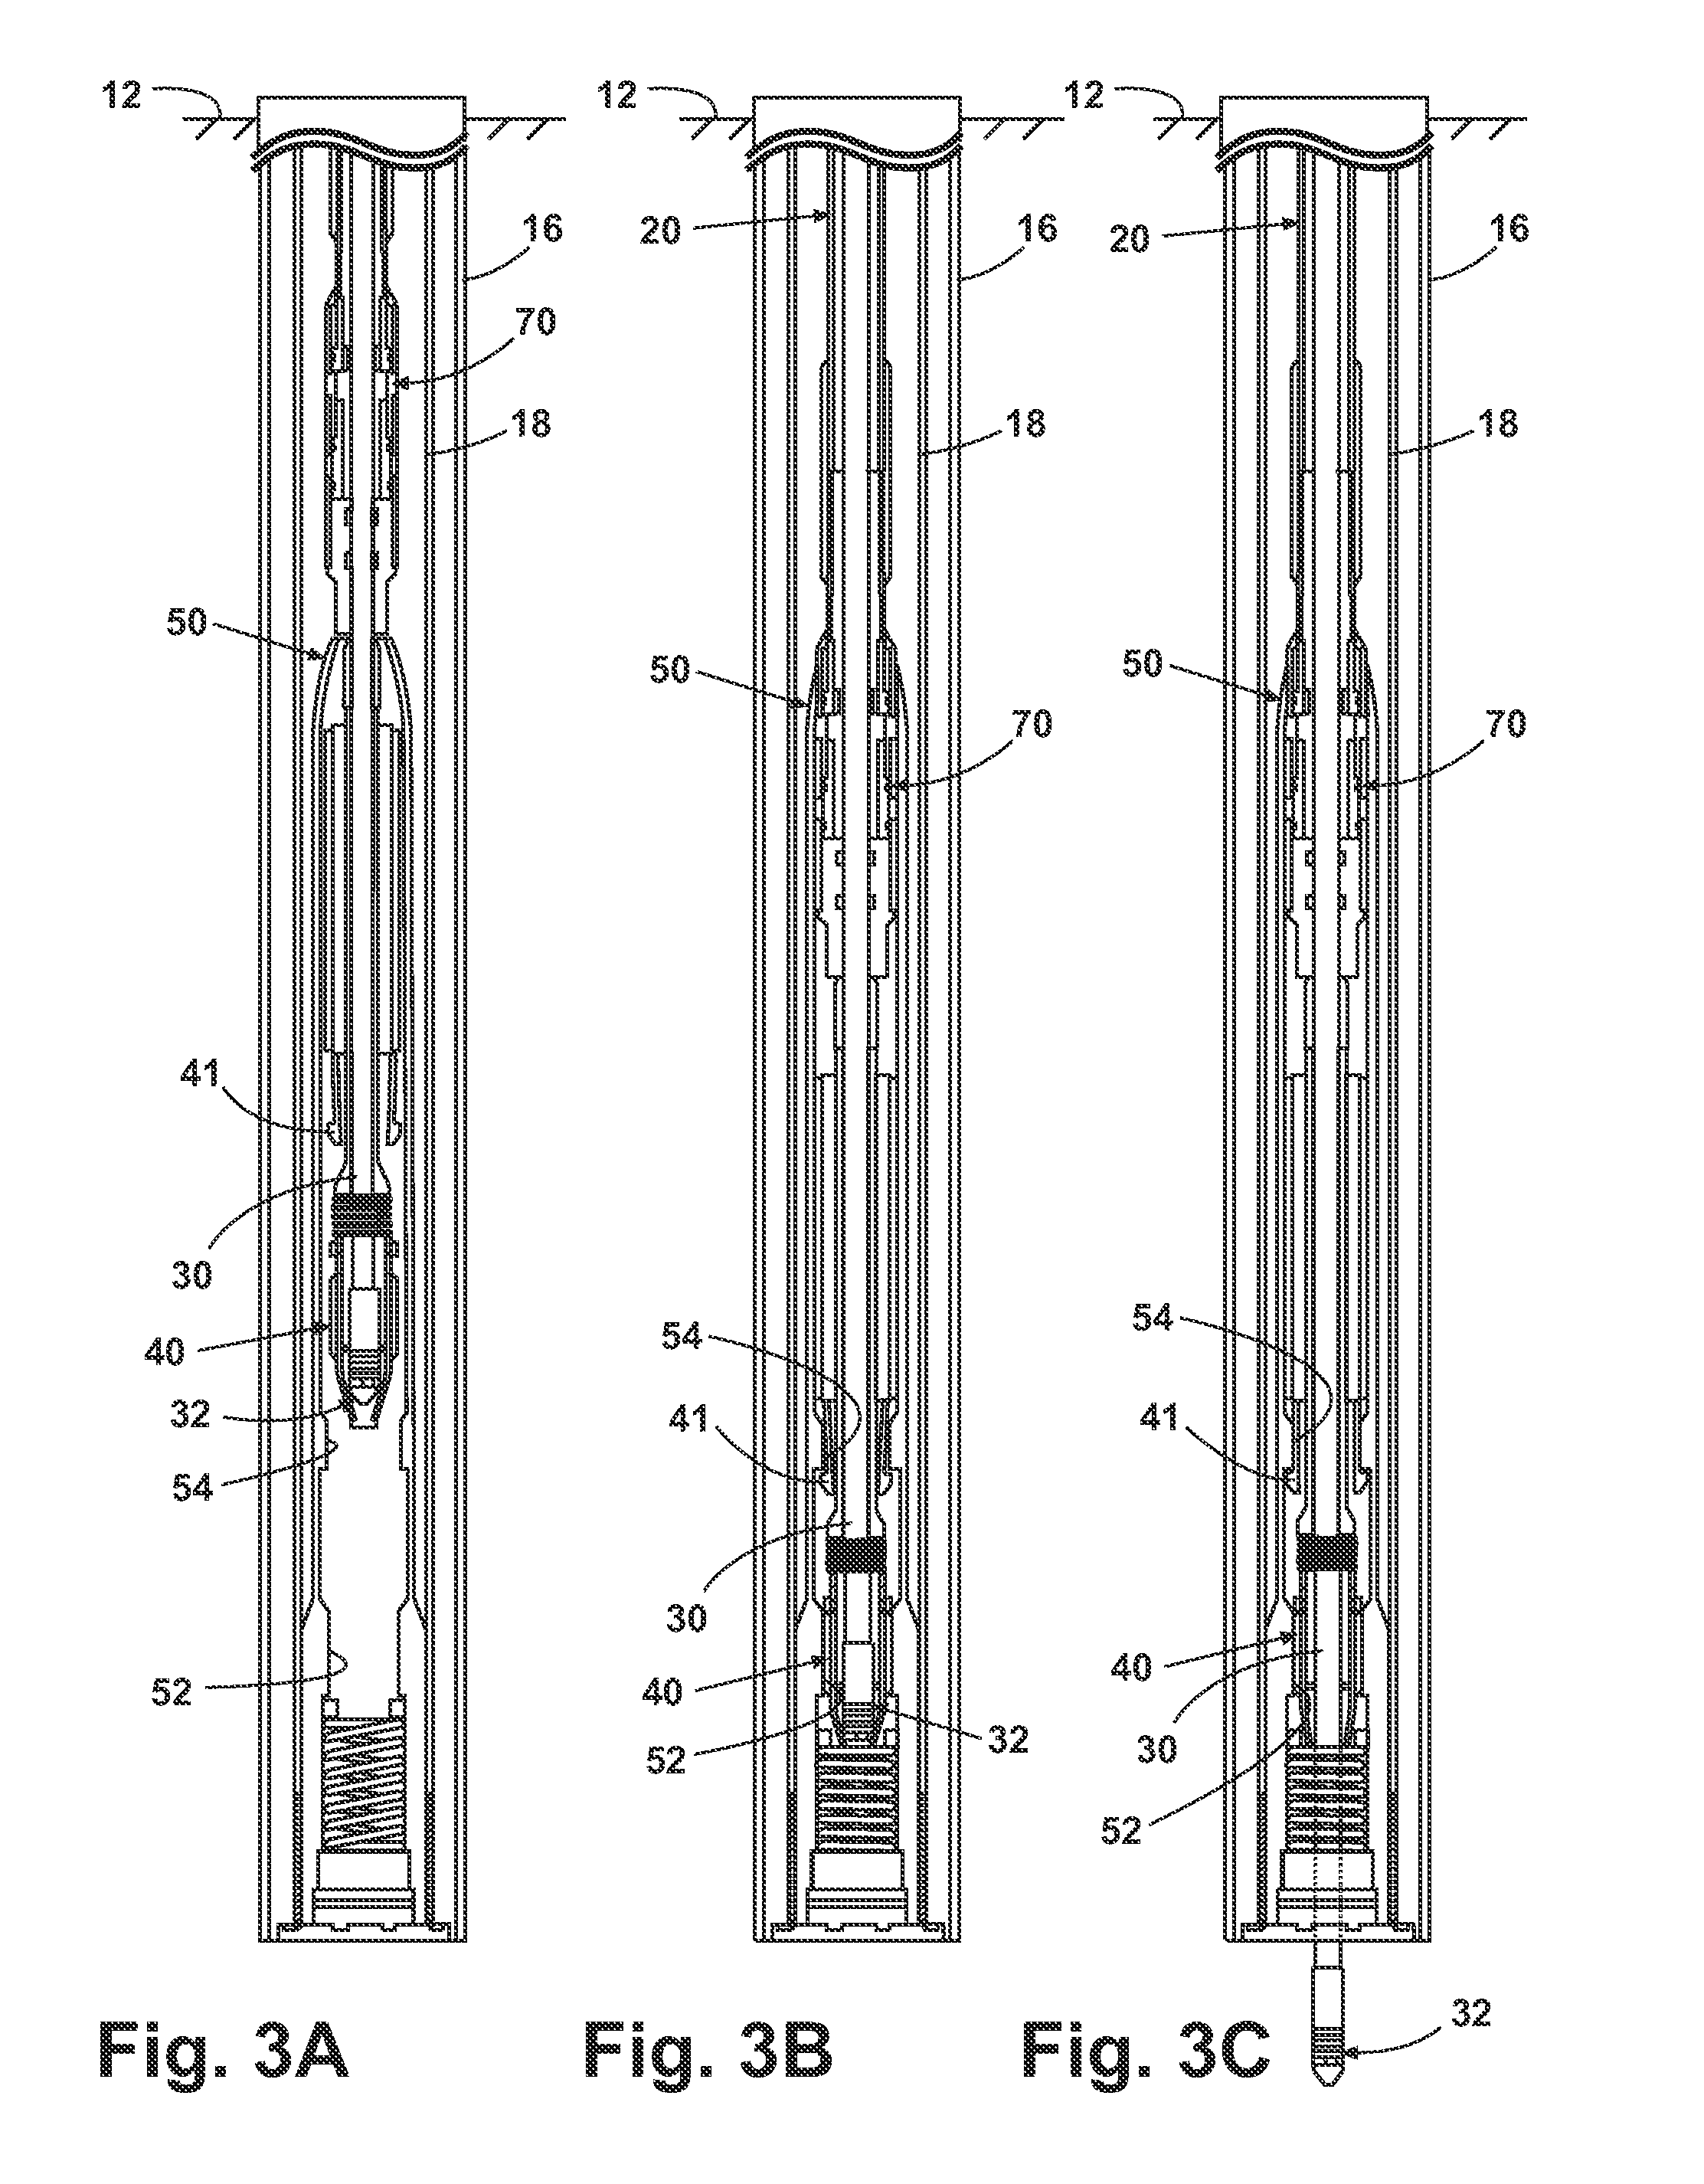 Apparatus and method for conveyance and control of a high pressure hose in jet drilling operations